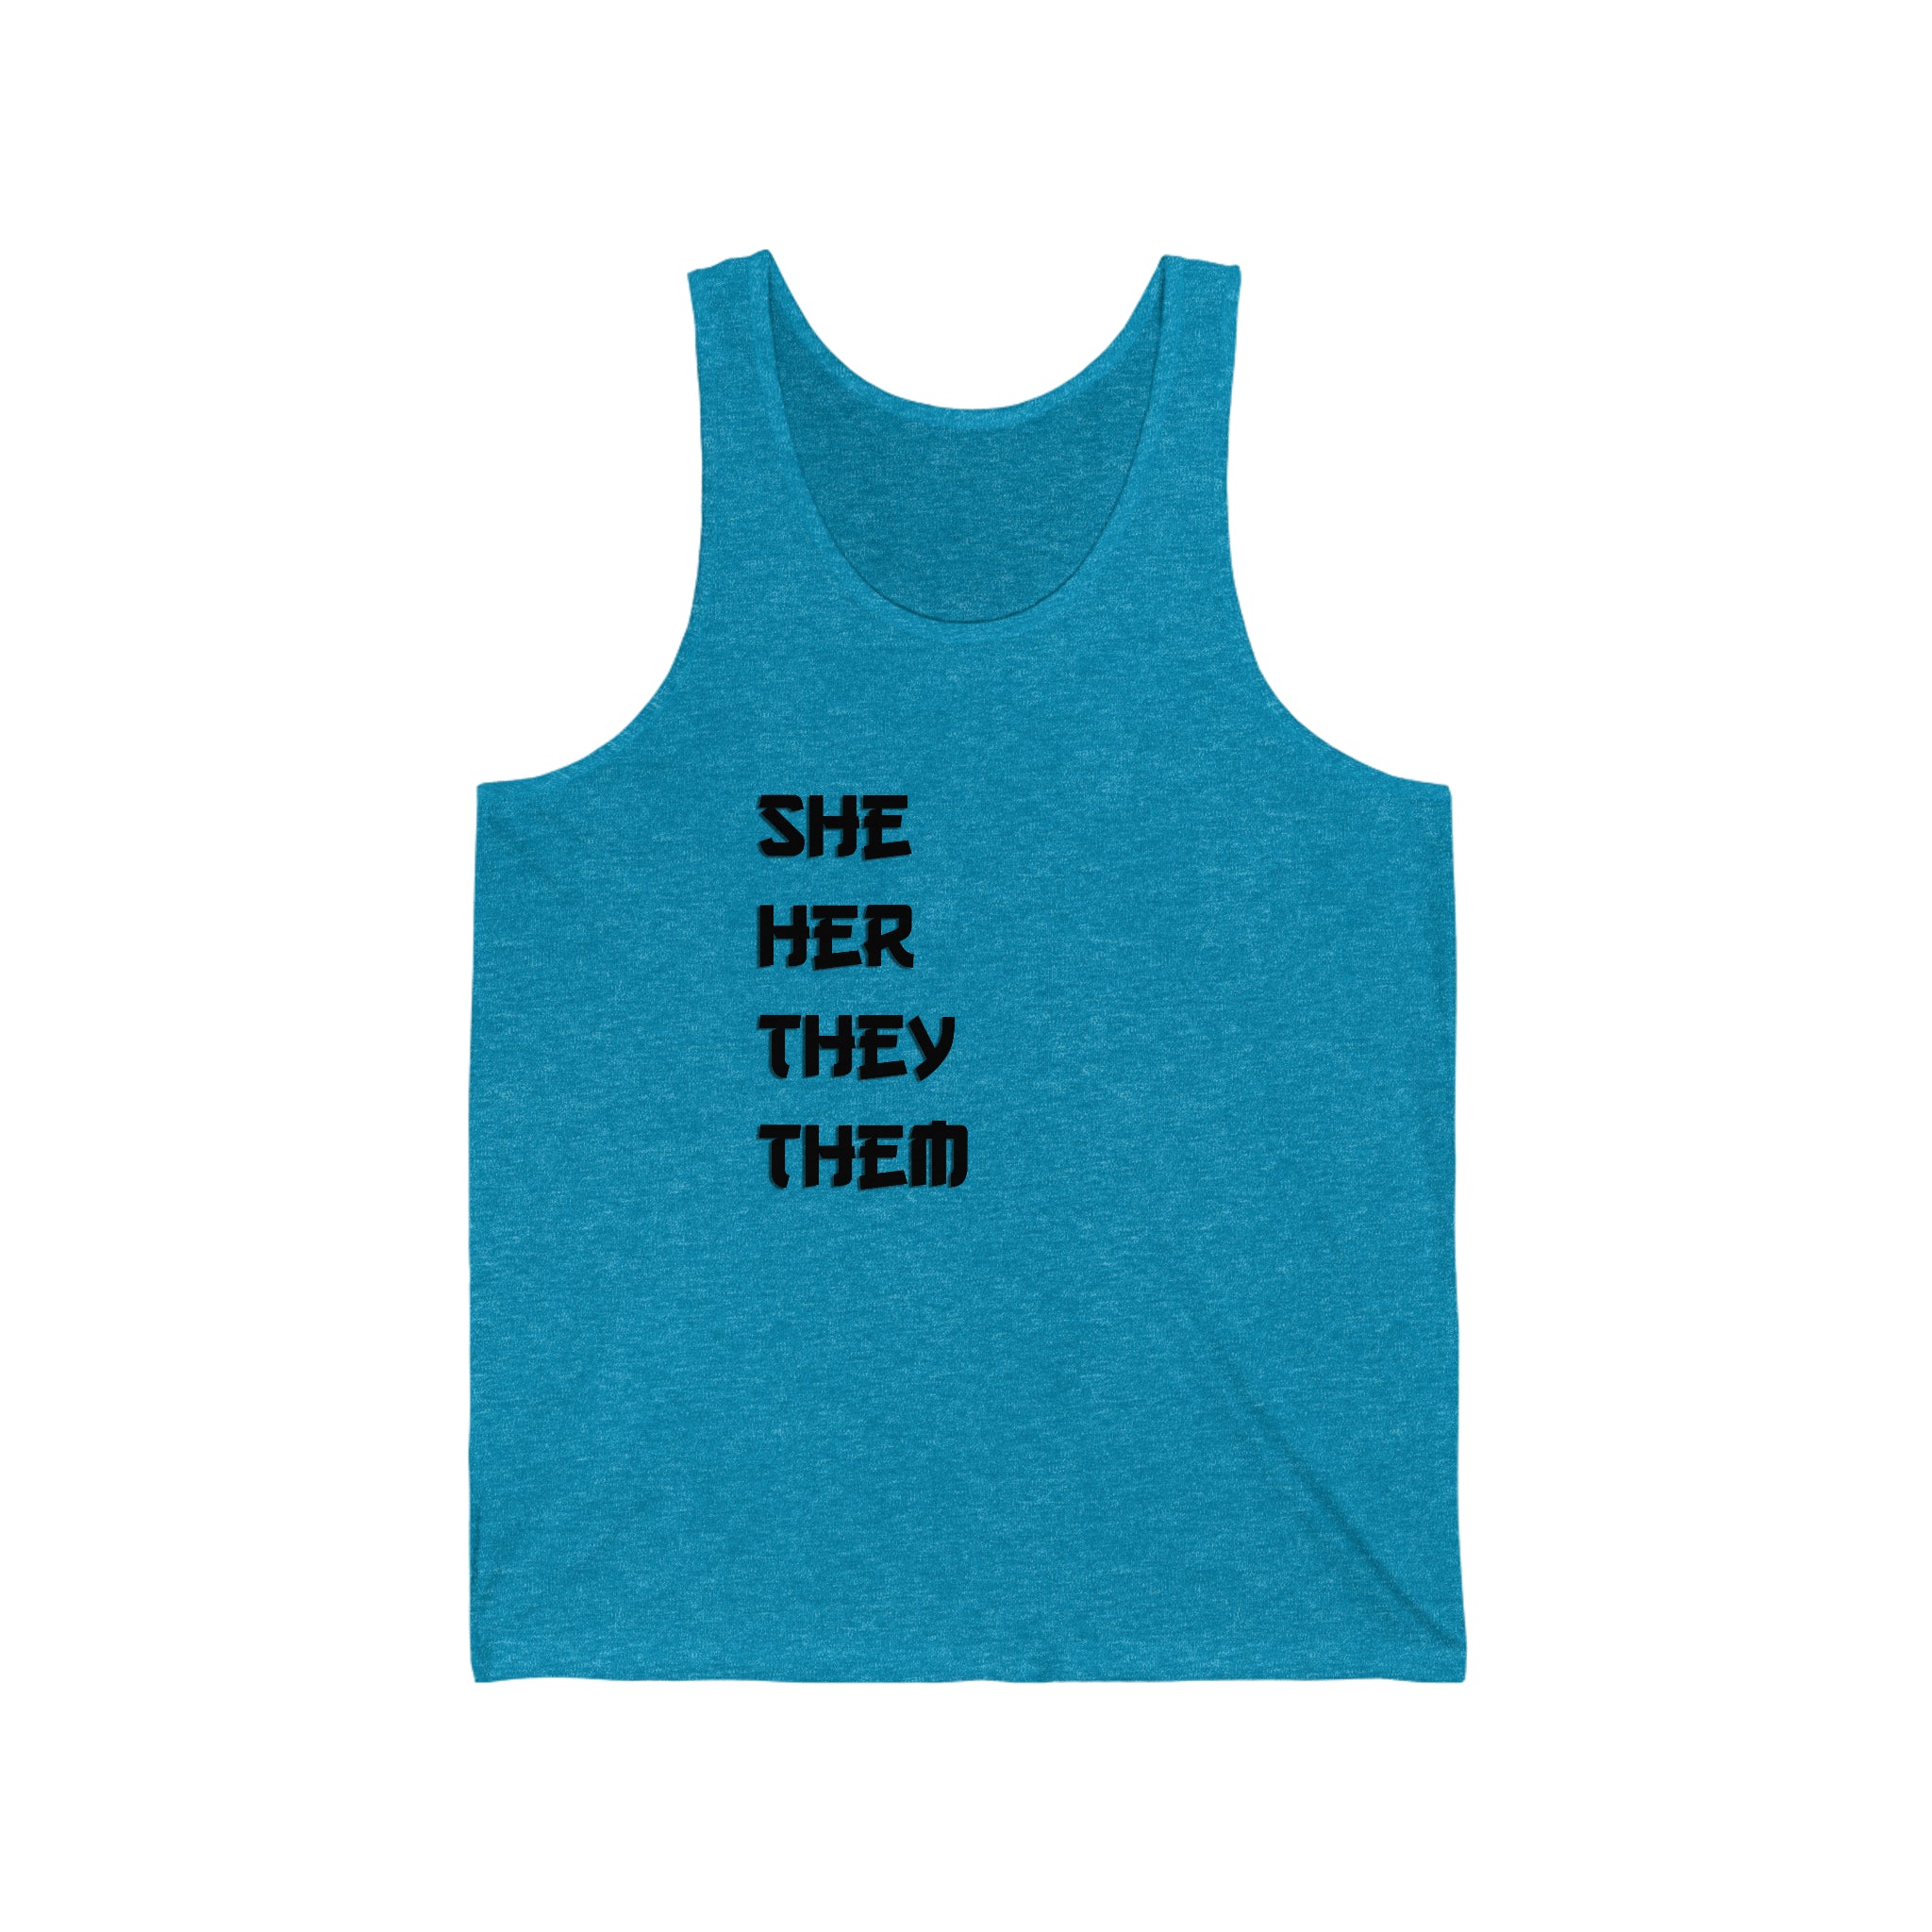 She Her They Them Pronouns - Jersey Tank top shirt